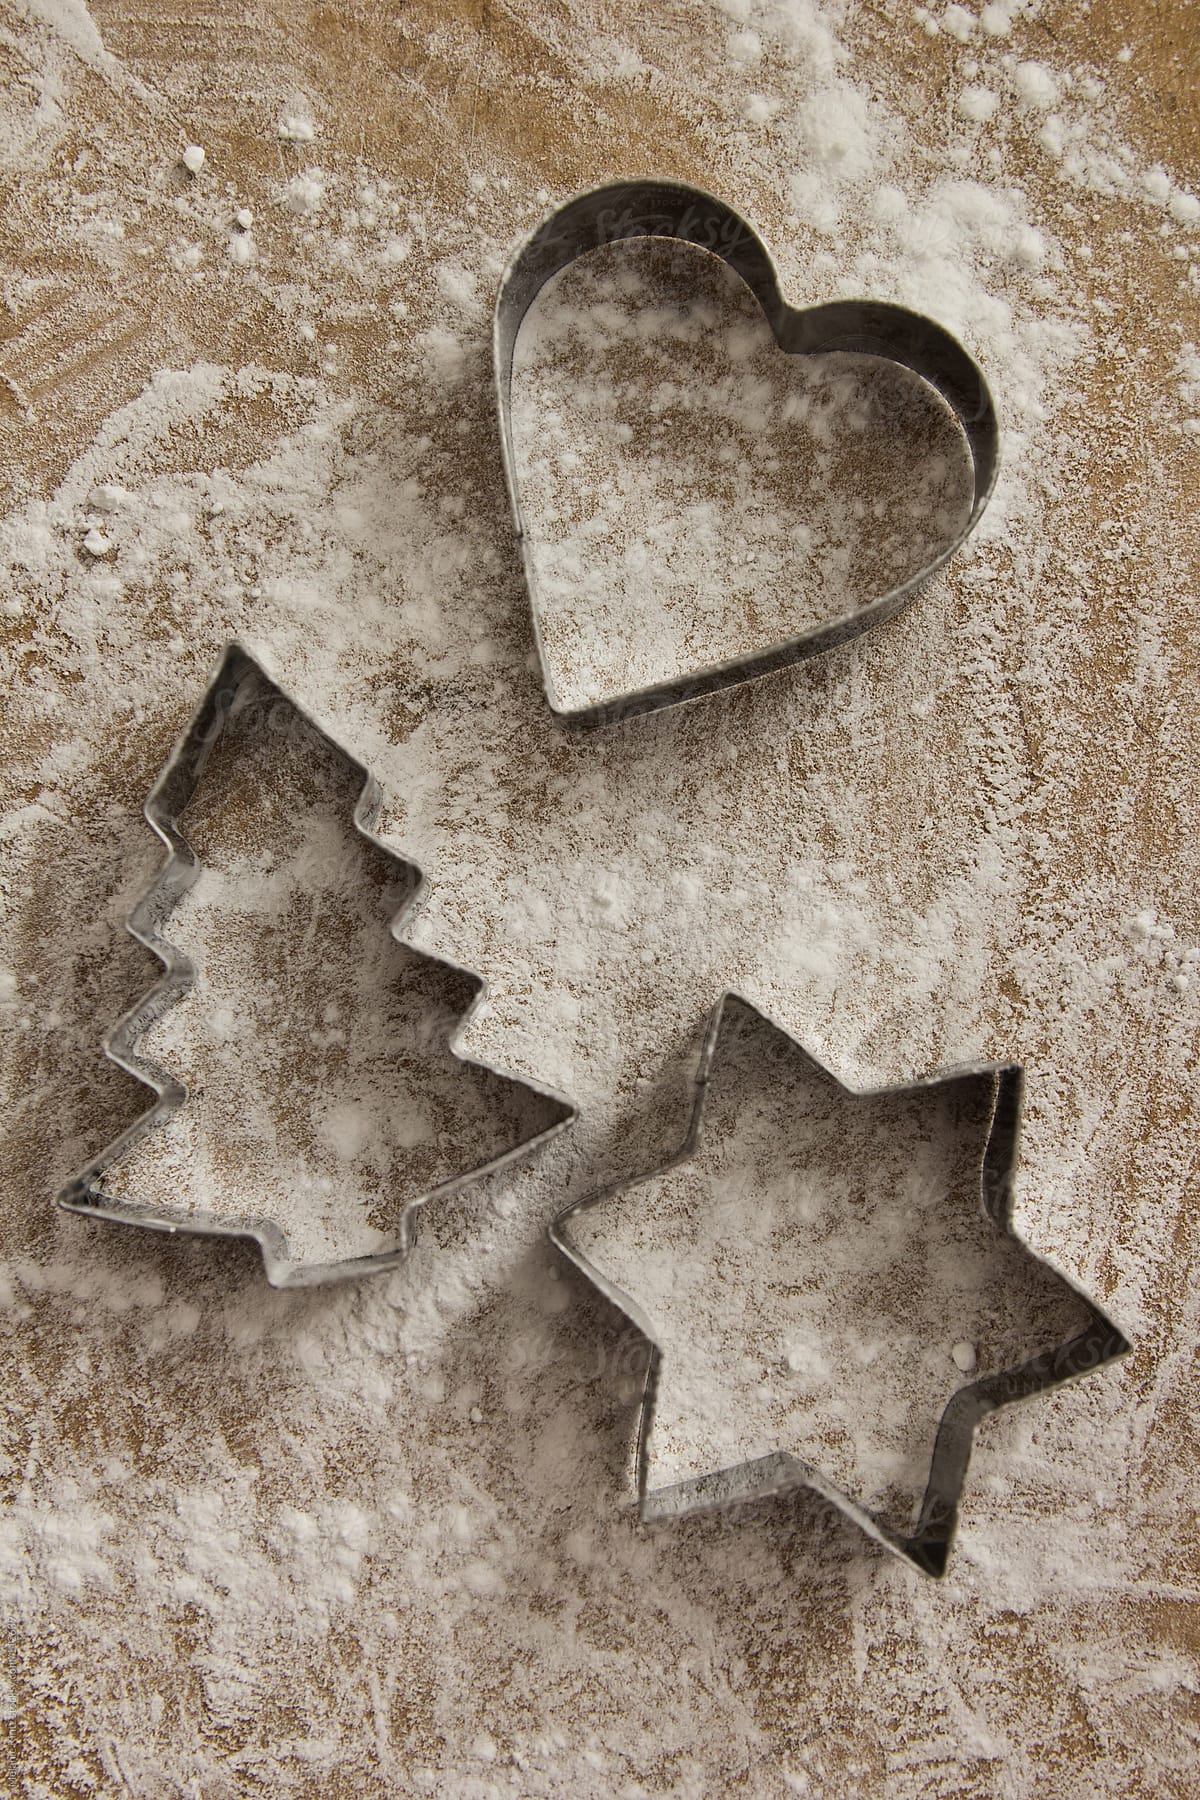 Star, heart and christmas tree shaped cookie cutters on wooden board covered with flour